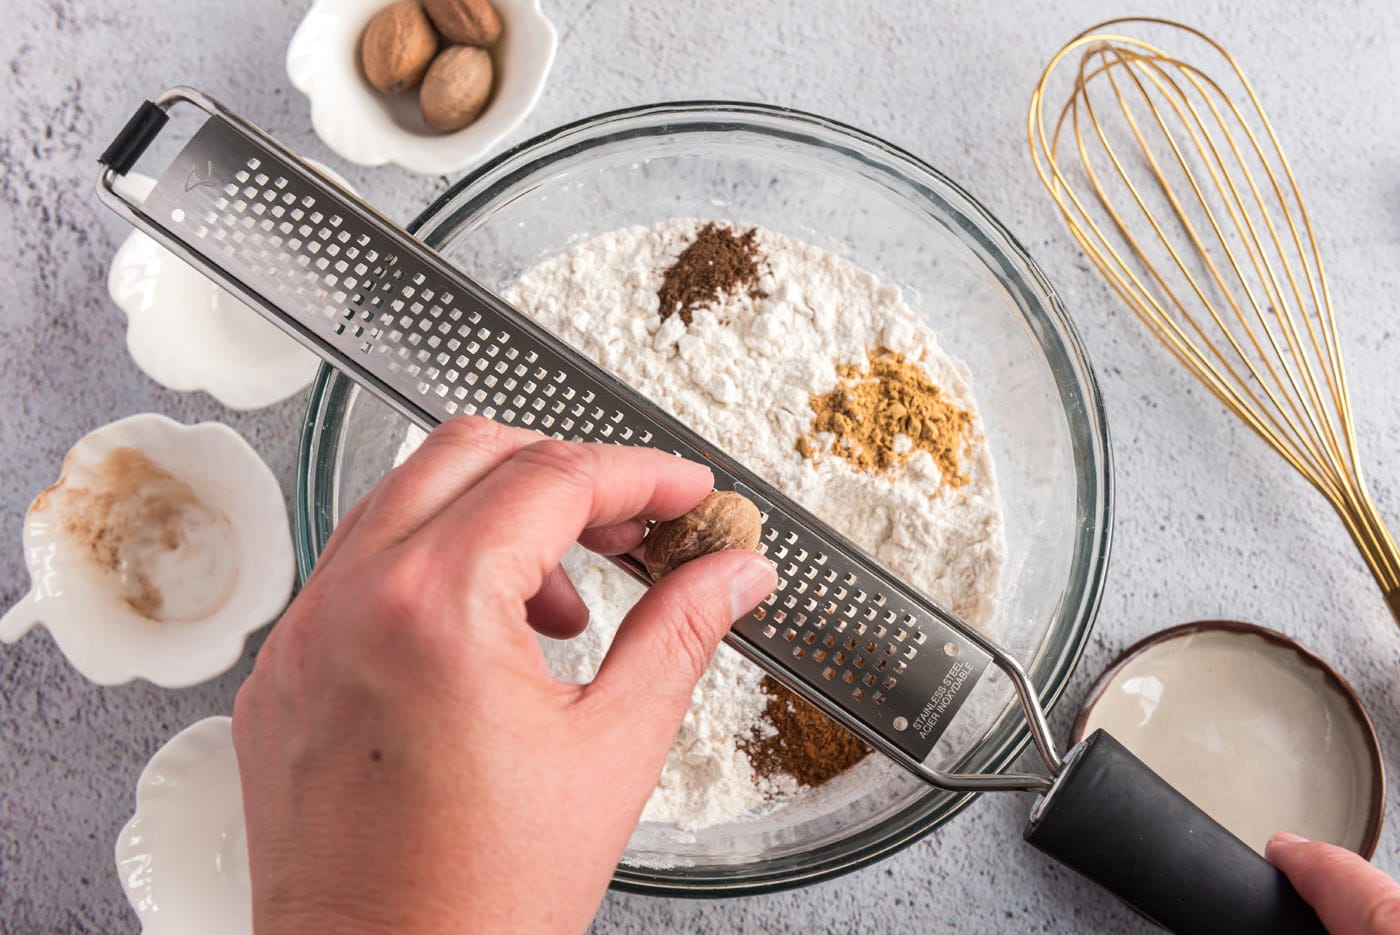 grating nutmeg over flour mixture and spices in a bowl